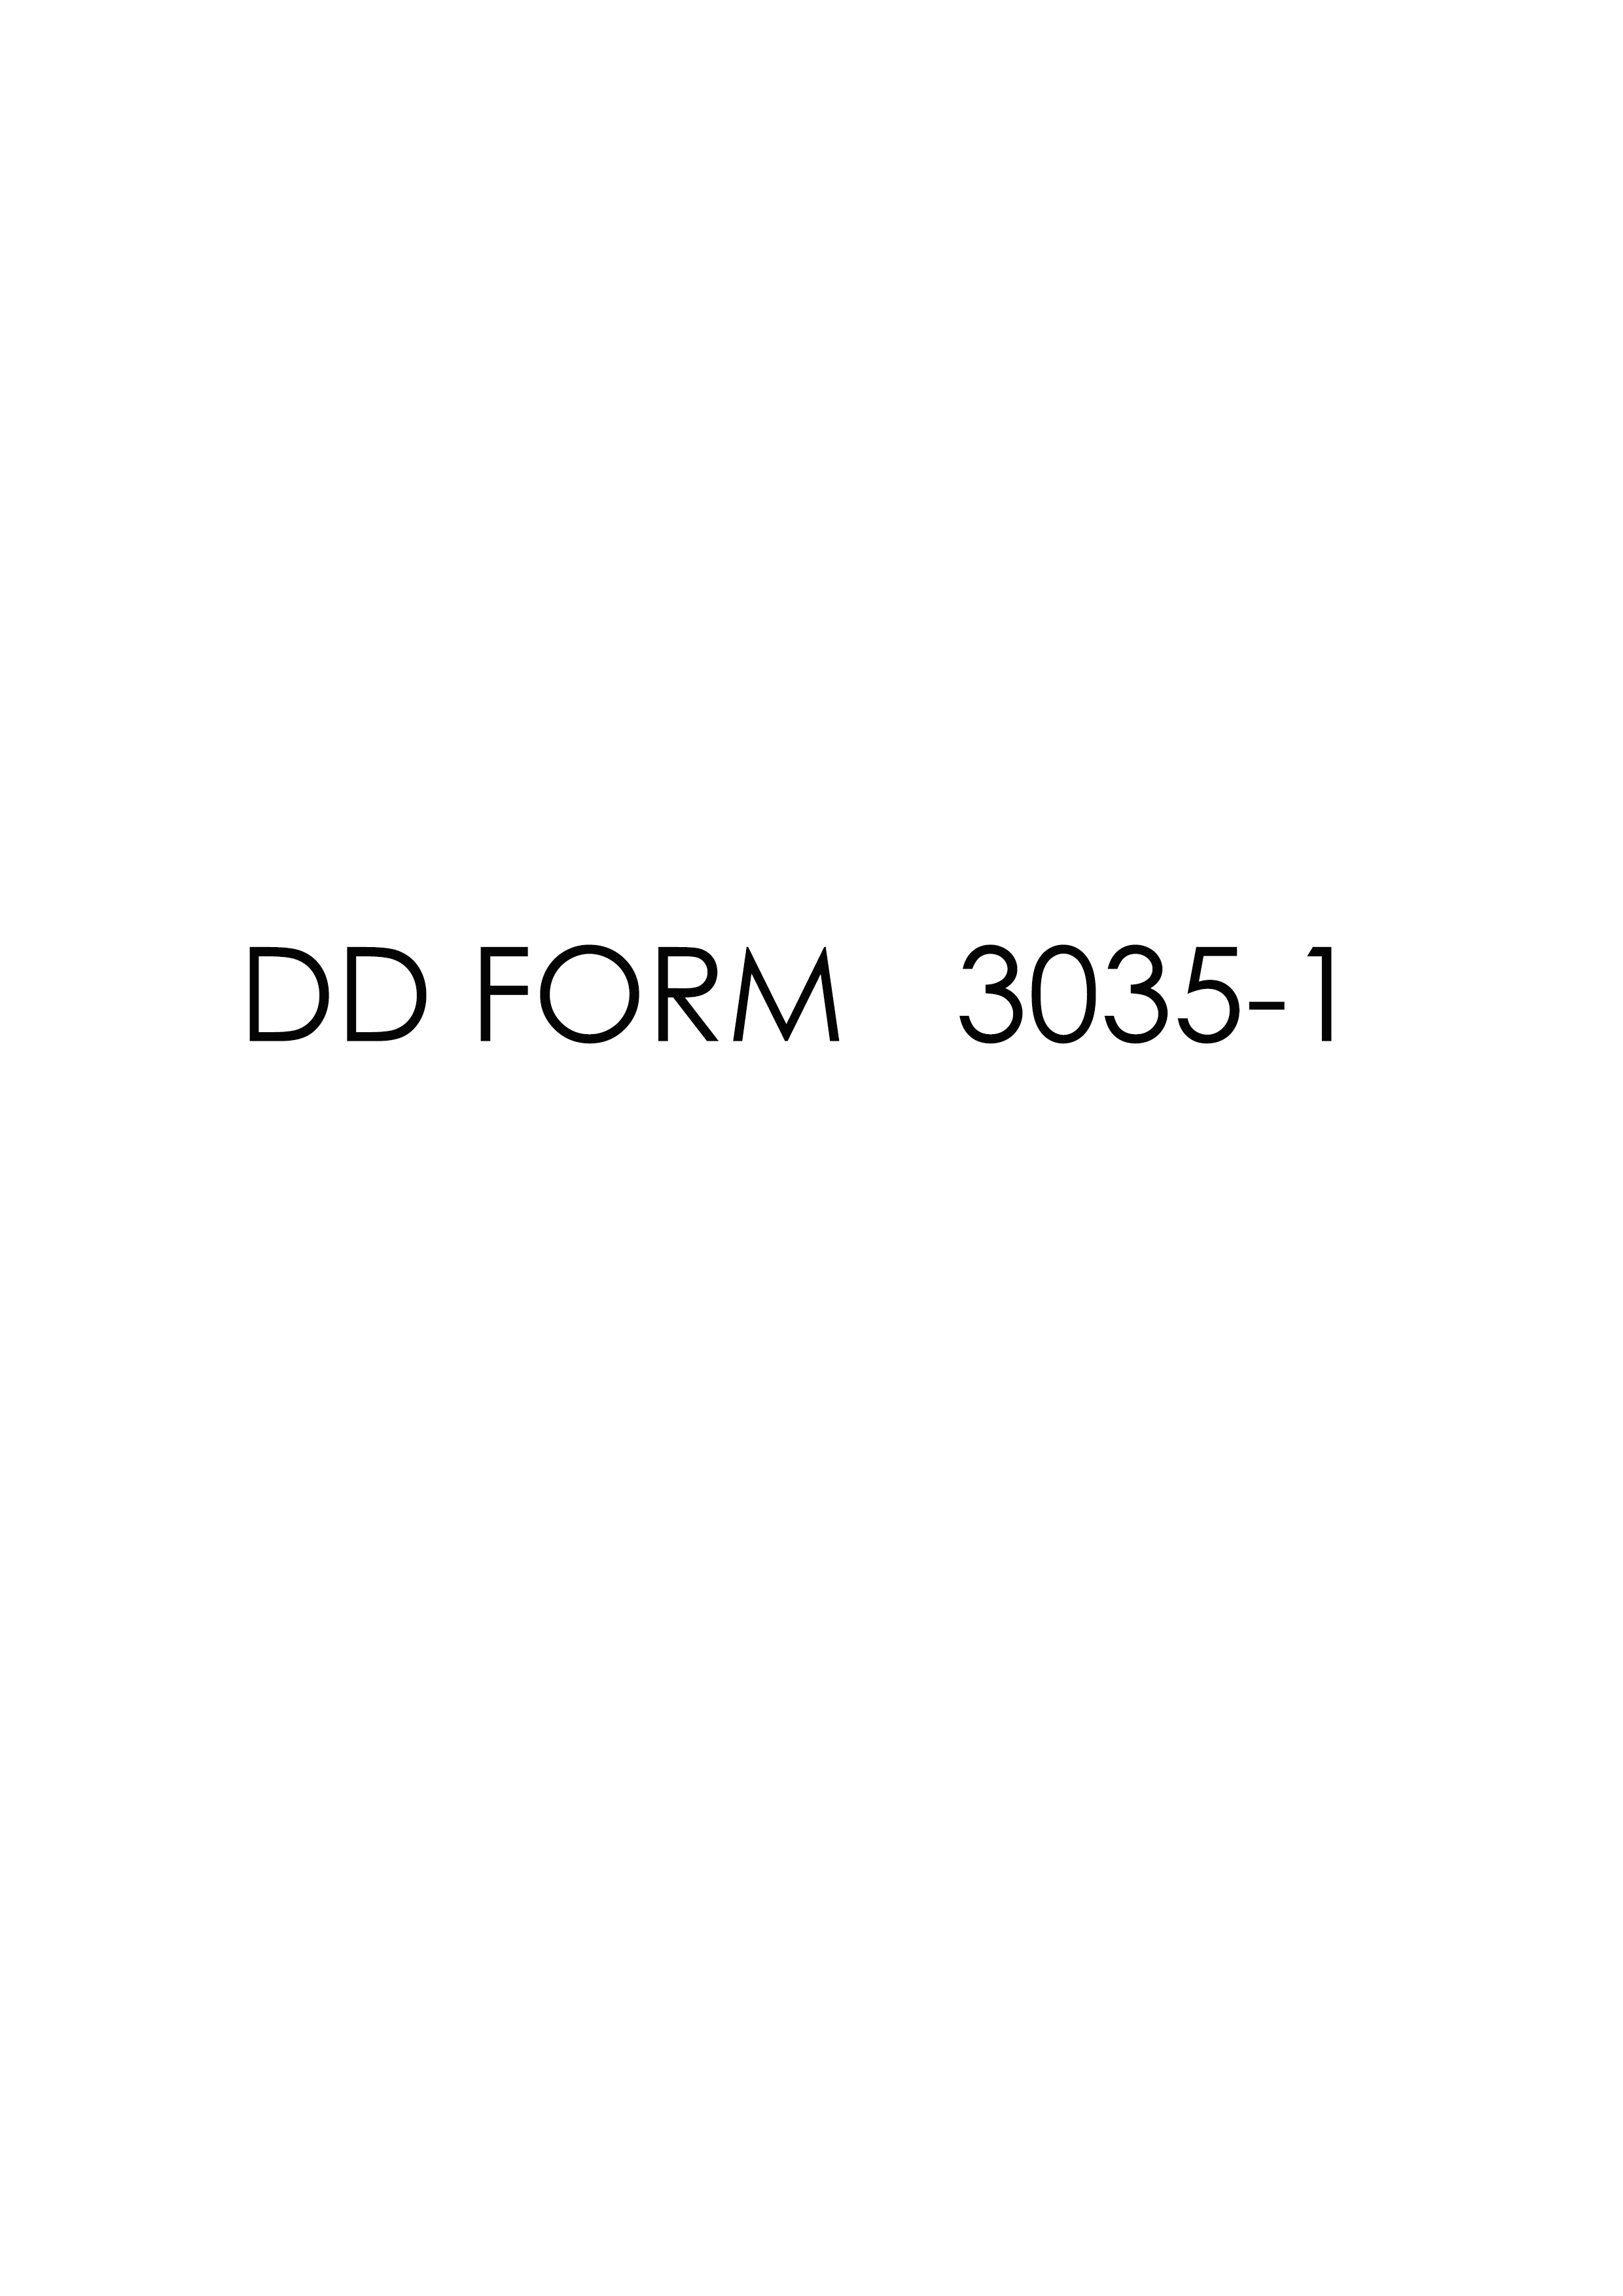 Download Fillable dd Form 3035-1